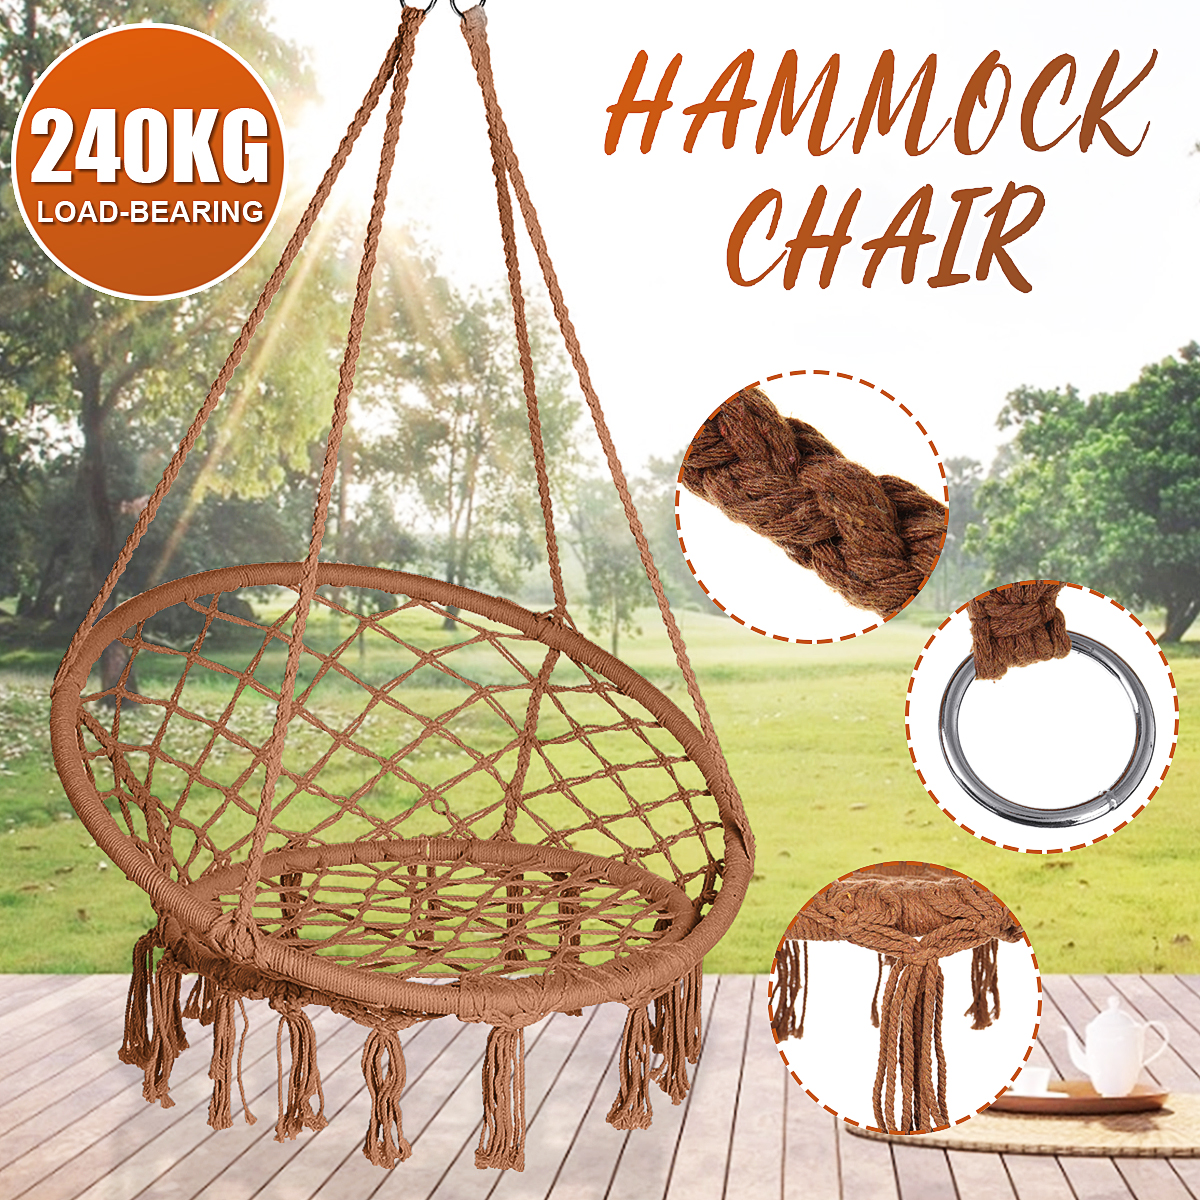 Cotton-Metal-Swing-Seat-Hanging-Chair-Hammock-Max-Load-240kg-for-Outdoor-Garden-Camping-1826564-1